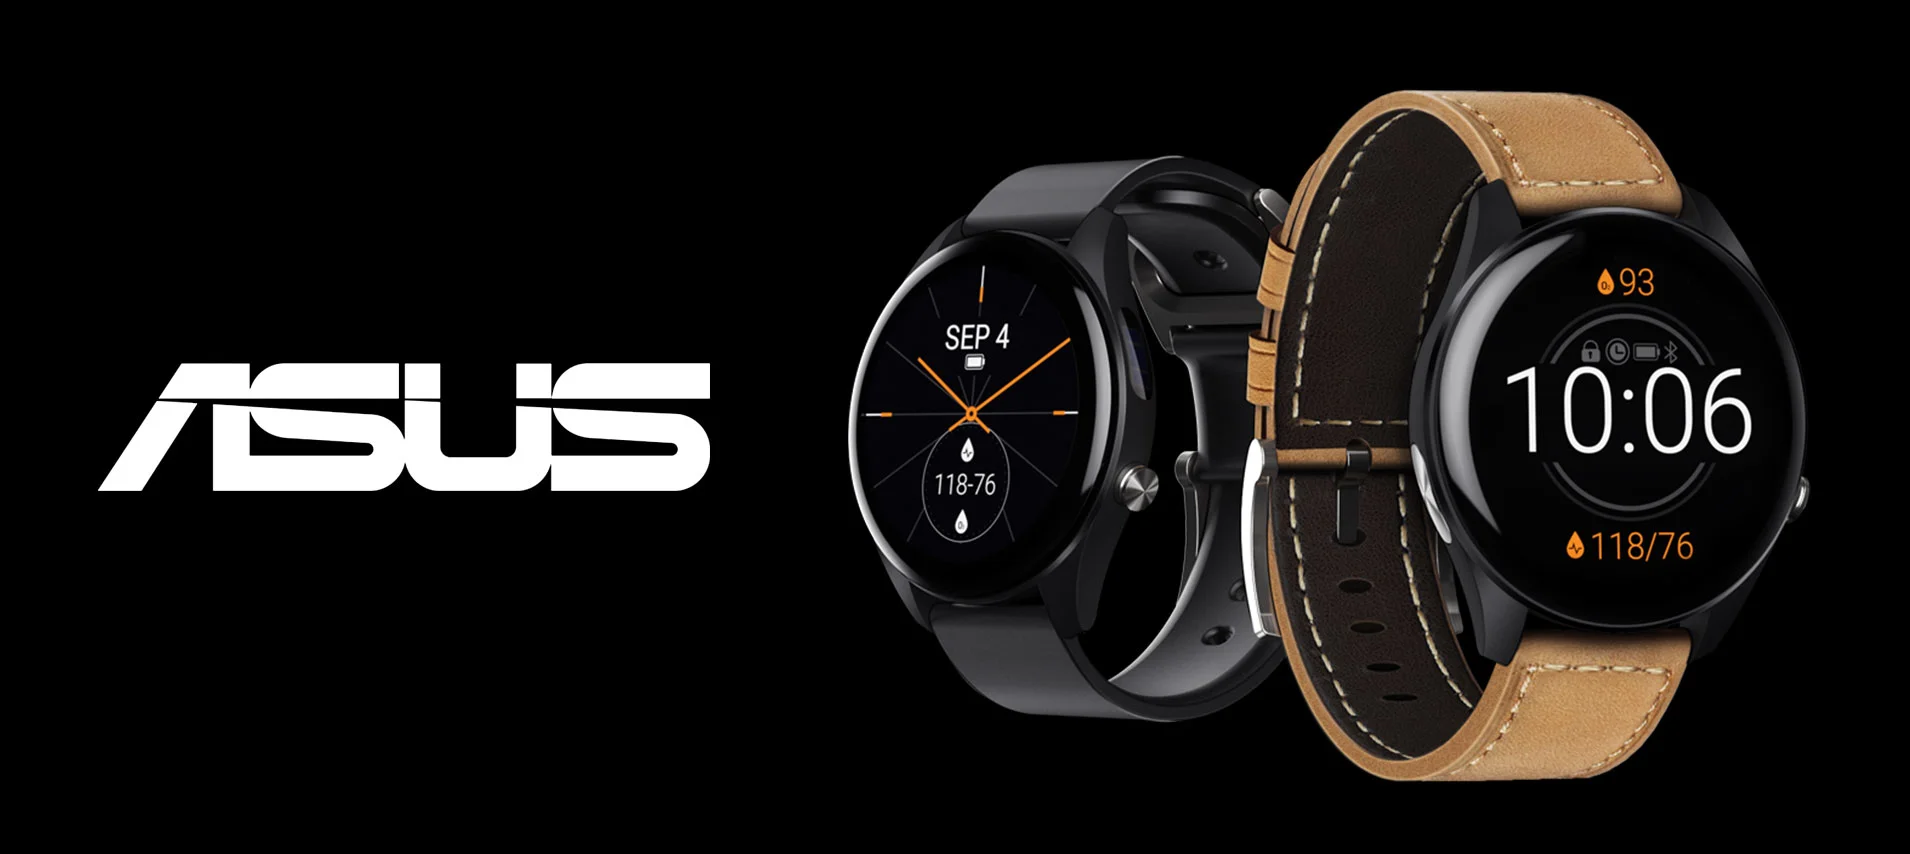 Asus Watch Price and Features